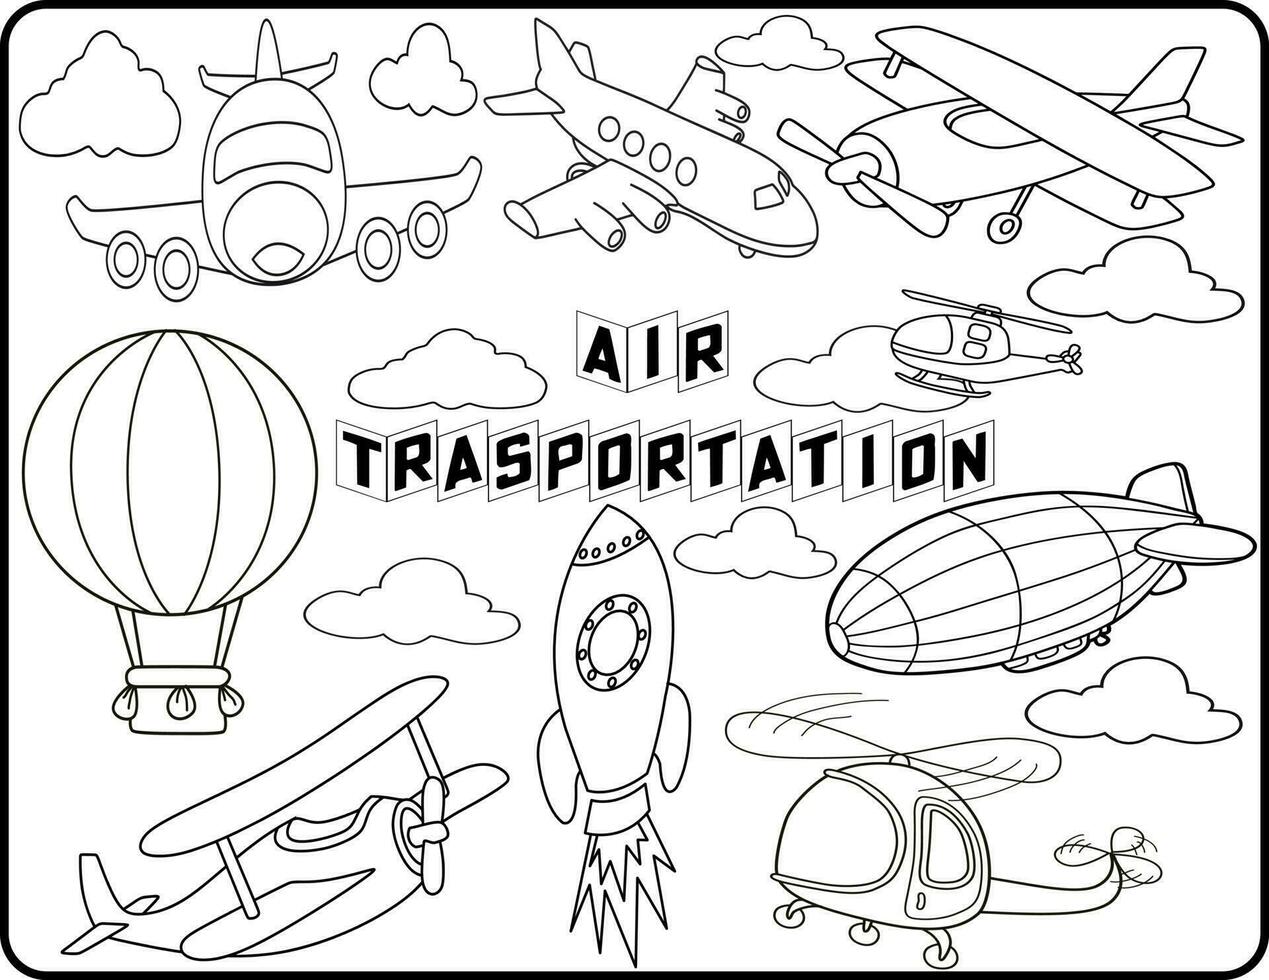 Air transport is set to be colored. coloring book to educate kids. Learn colors. visual educational game. Easy kid gaming and primary education simple level of difficulty. Coloring worksheet pages. vector